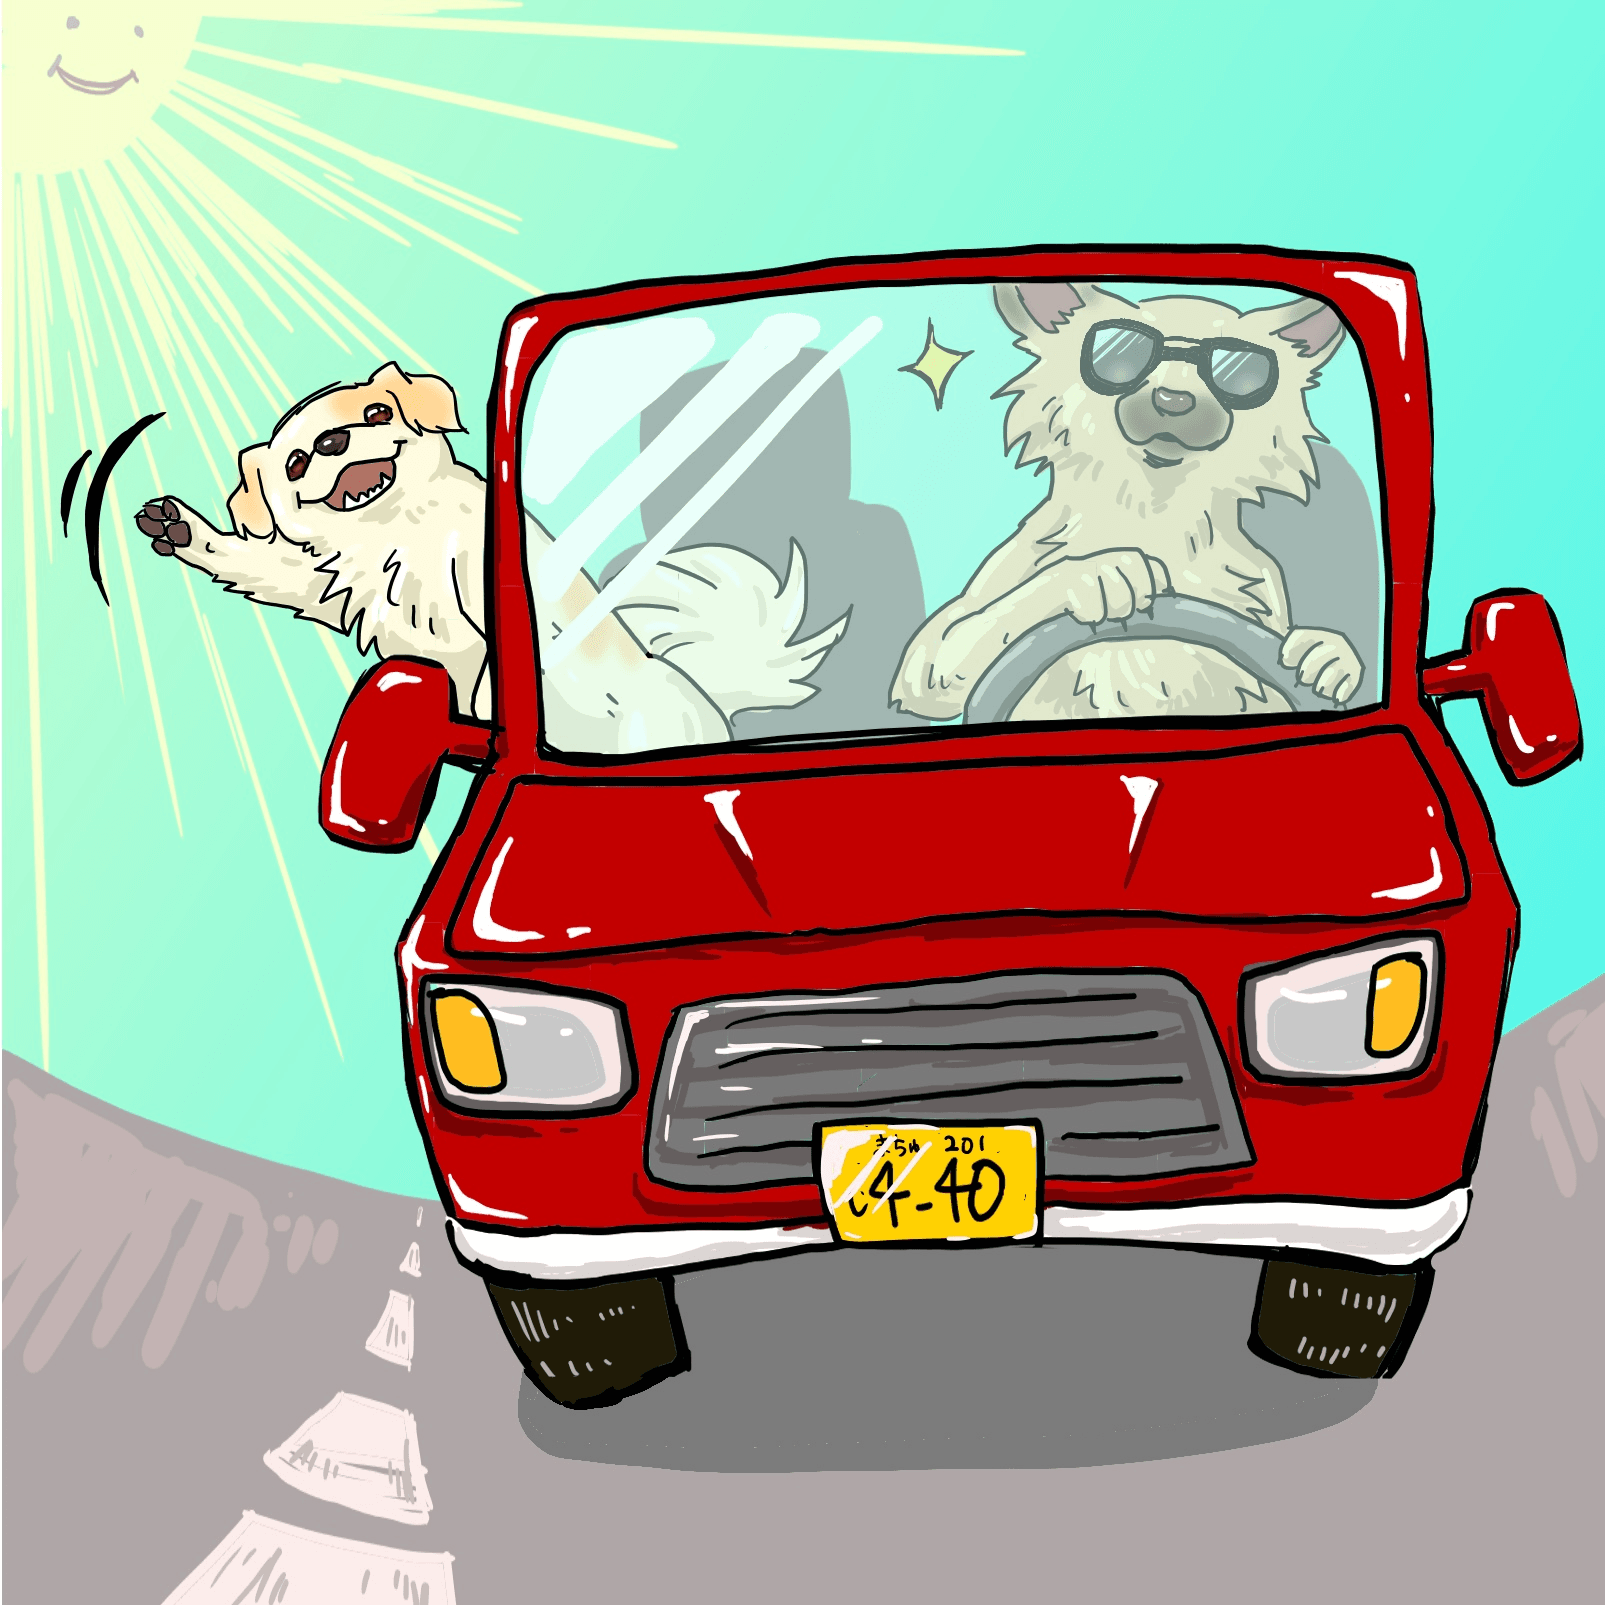 Love my dogs #001 "Dogs driving"